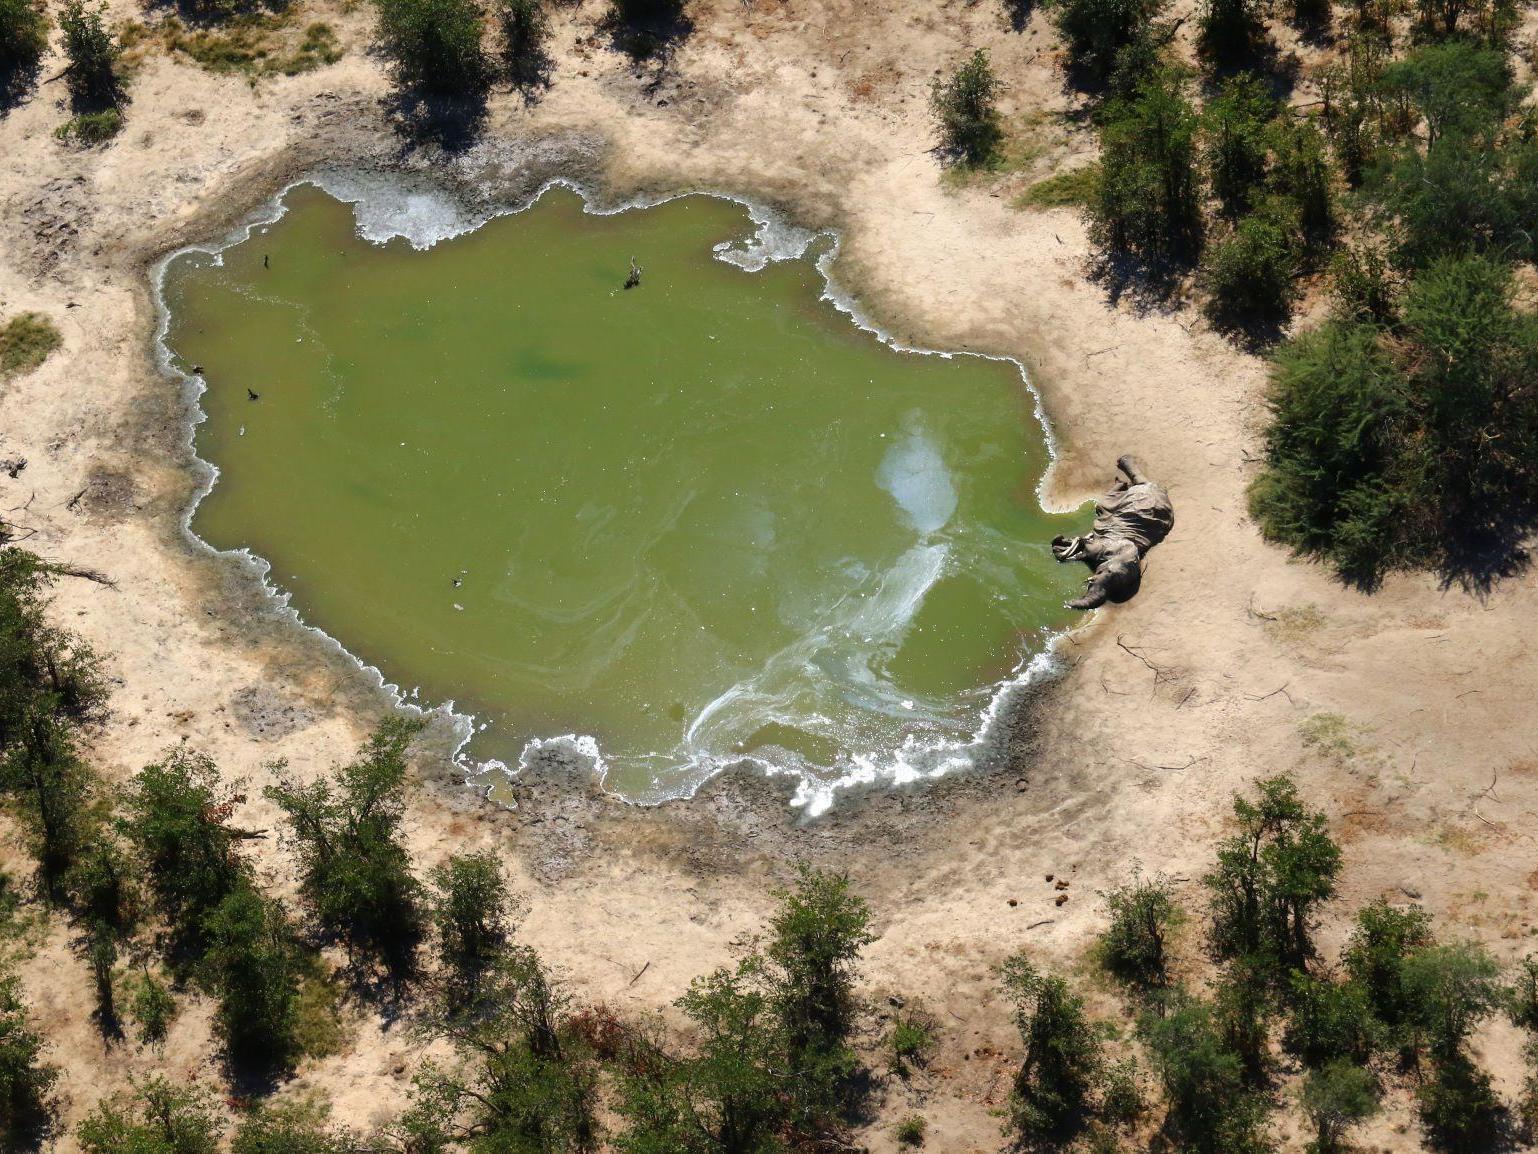 An aerial shot of an elephant found dead at a watering hole in the Okavango Delta, Botswana